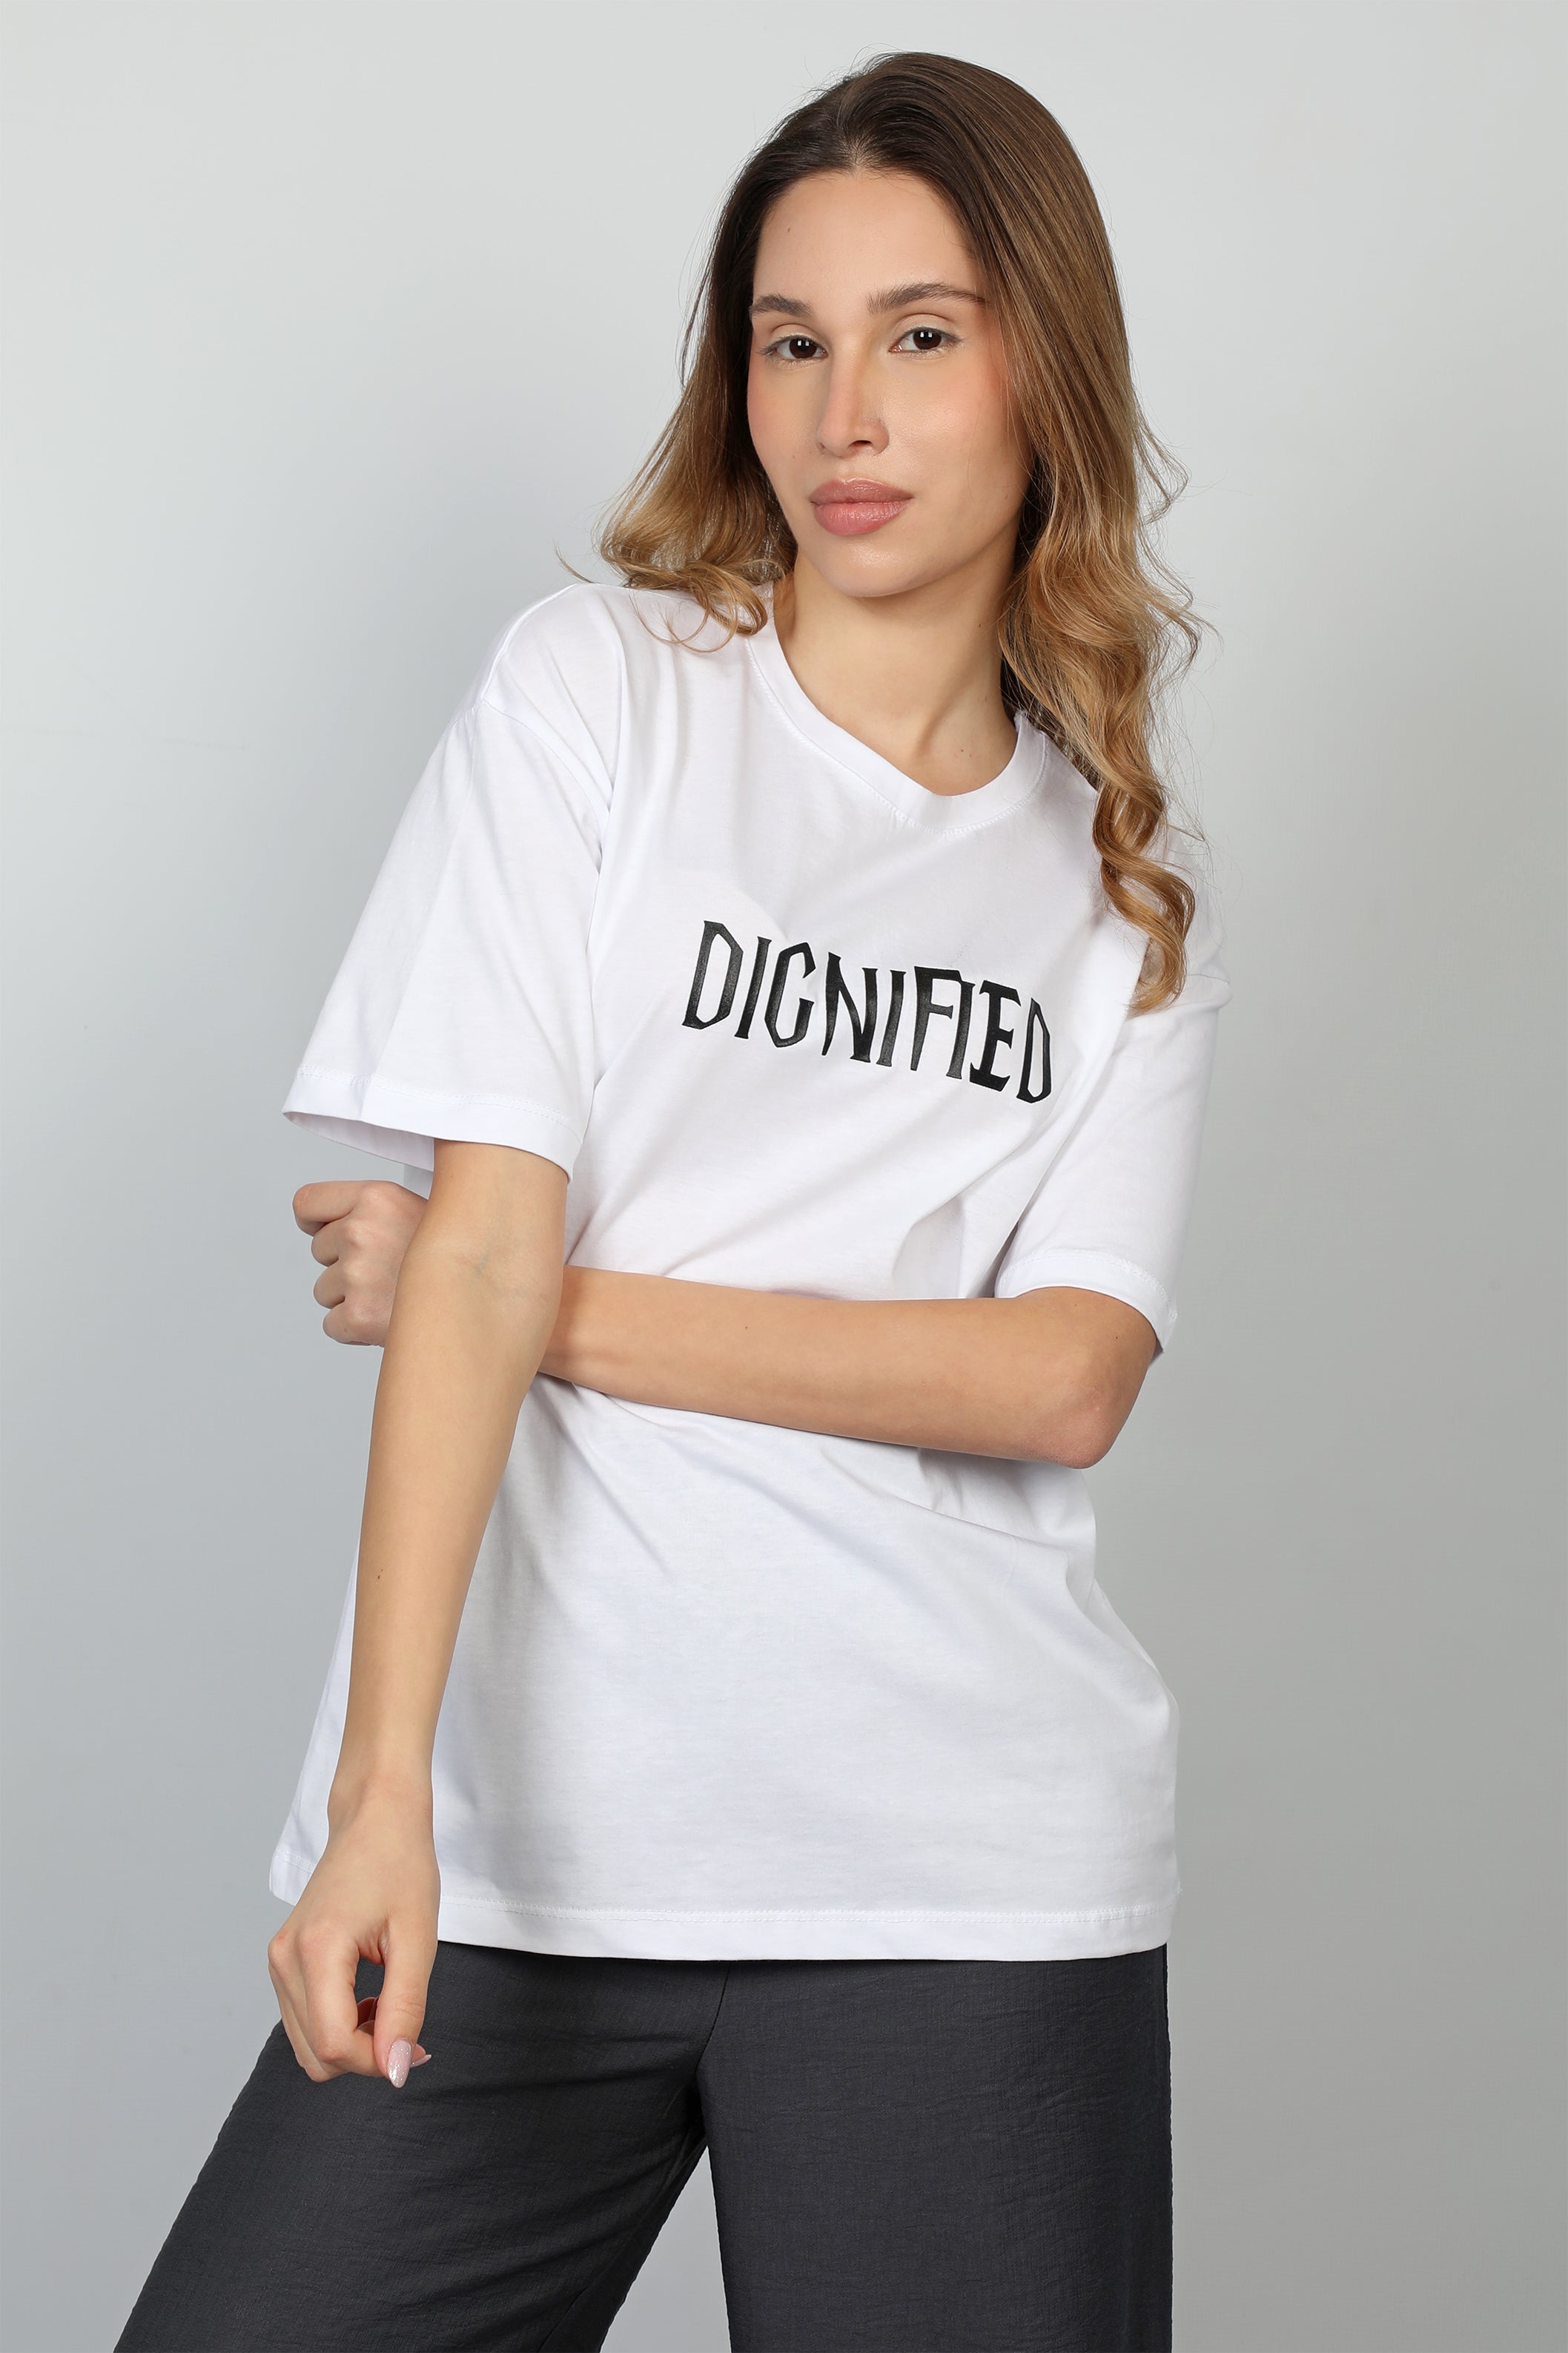 "DIGNIFIED" Printed White Oversized T-shirt